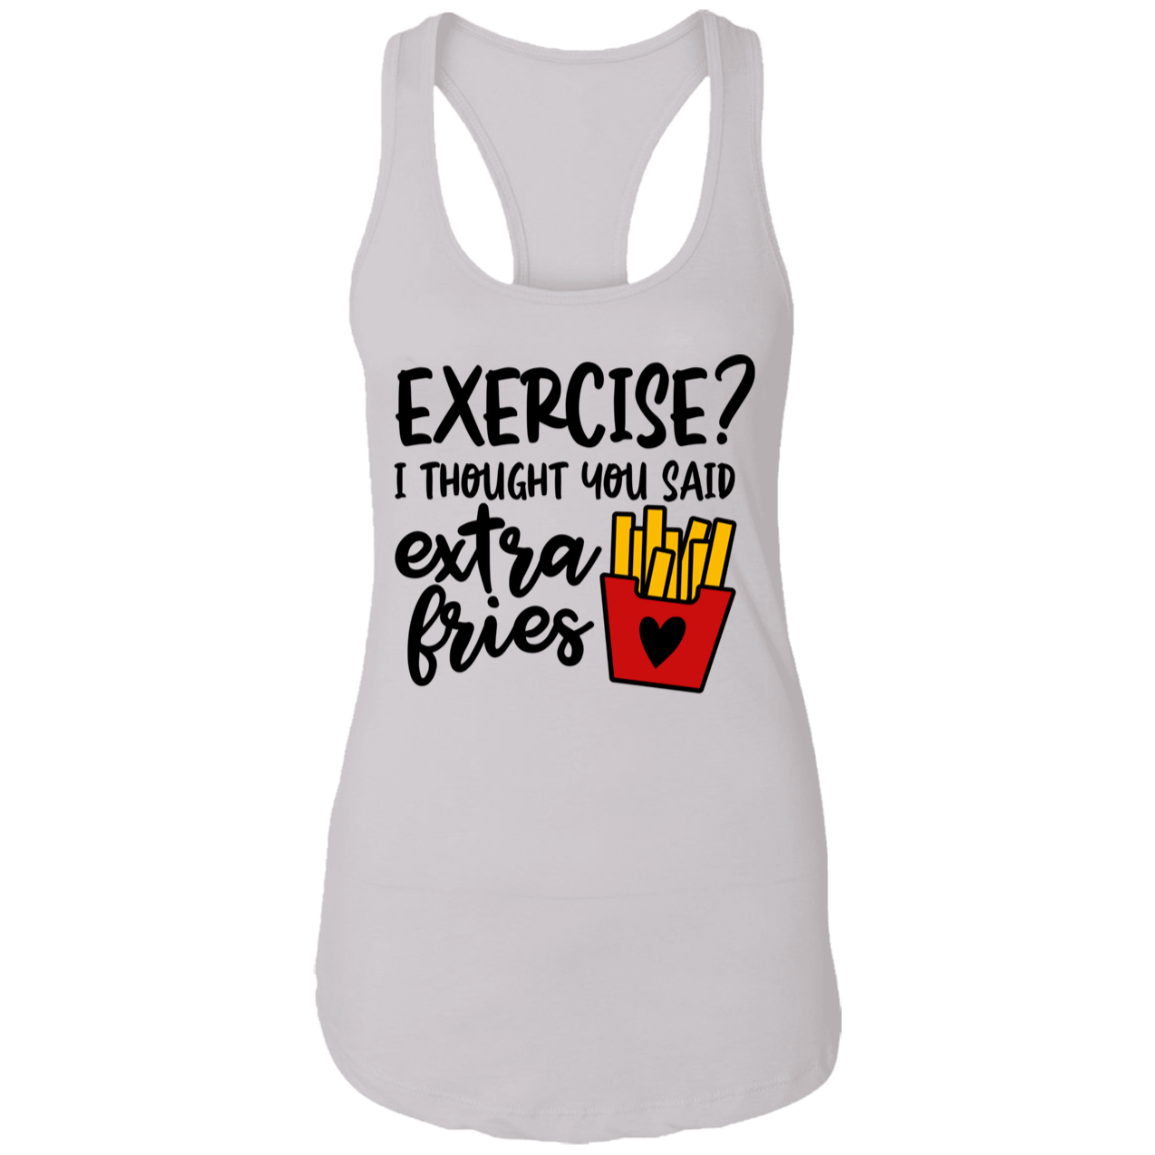 Exercise? I Thought You Said Fries Racerback Tank